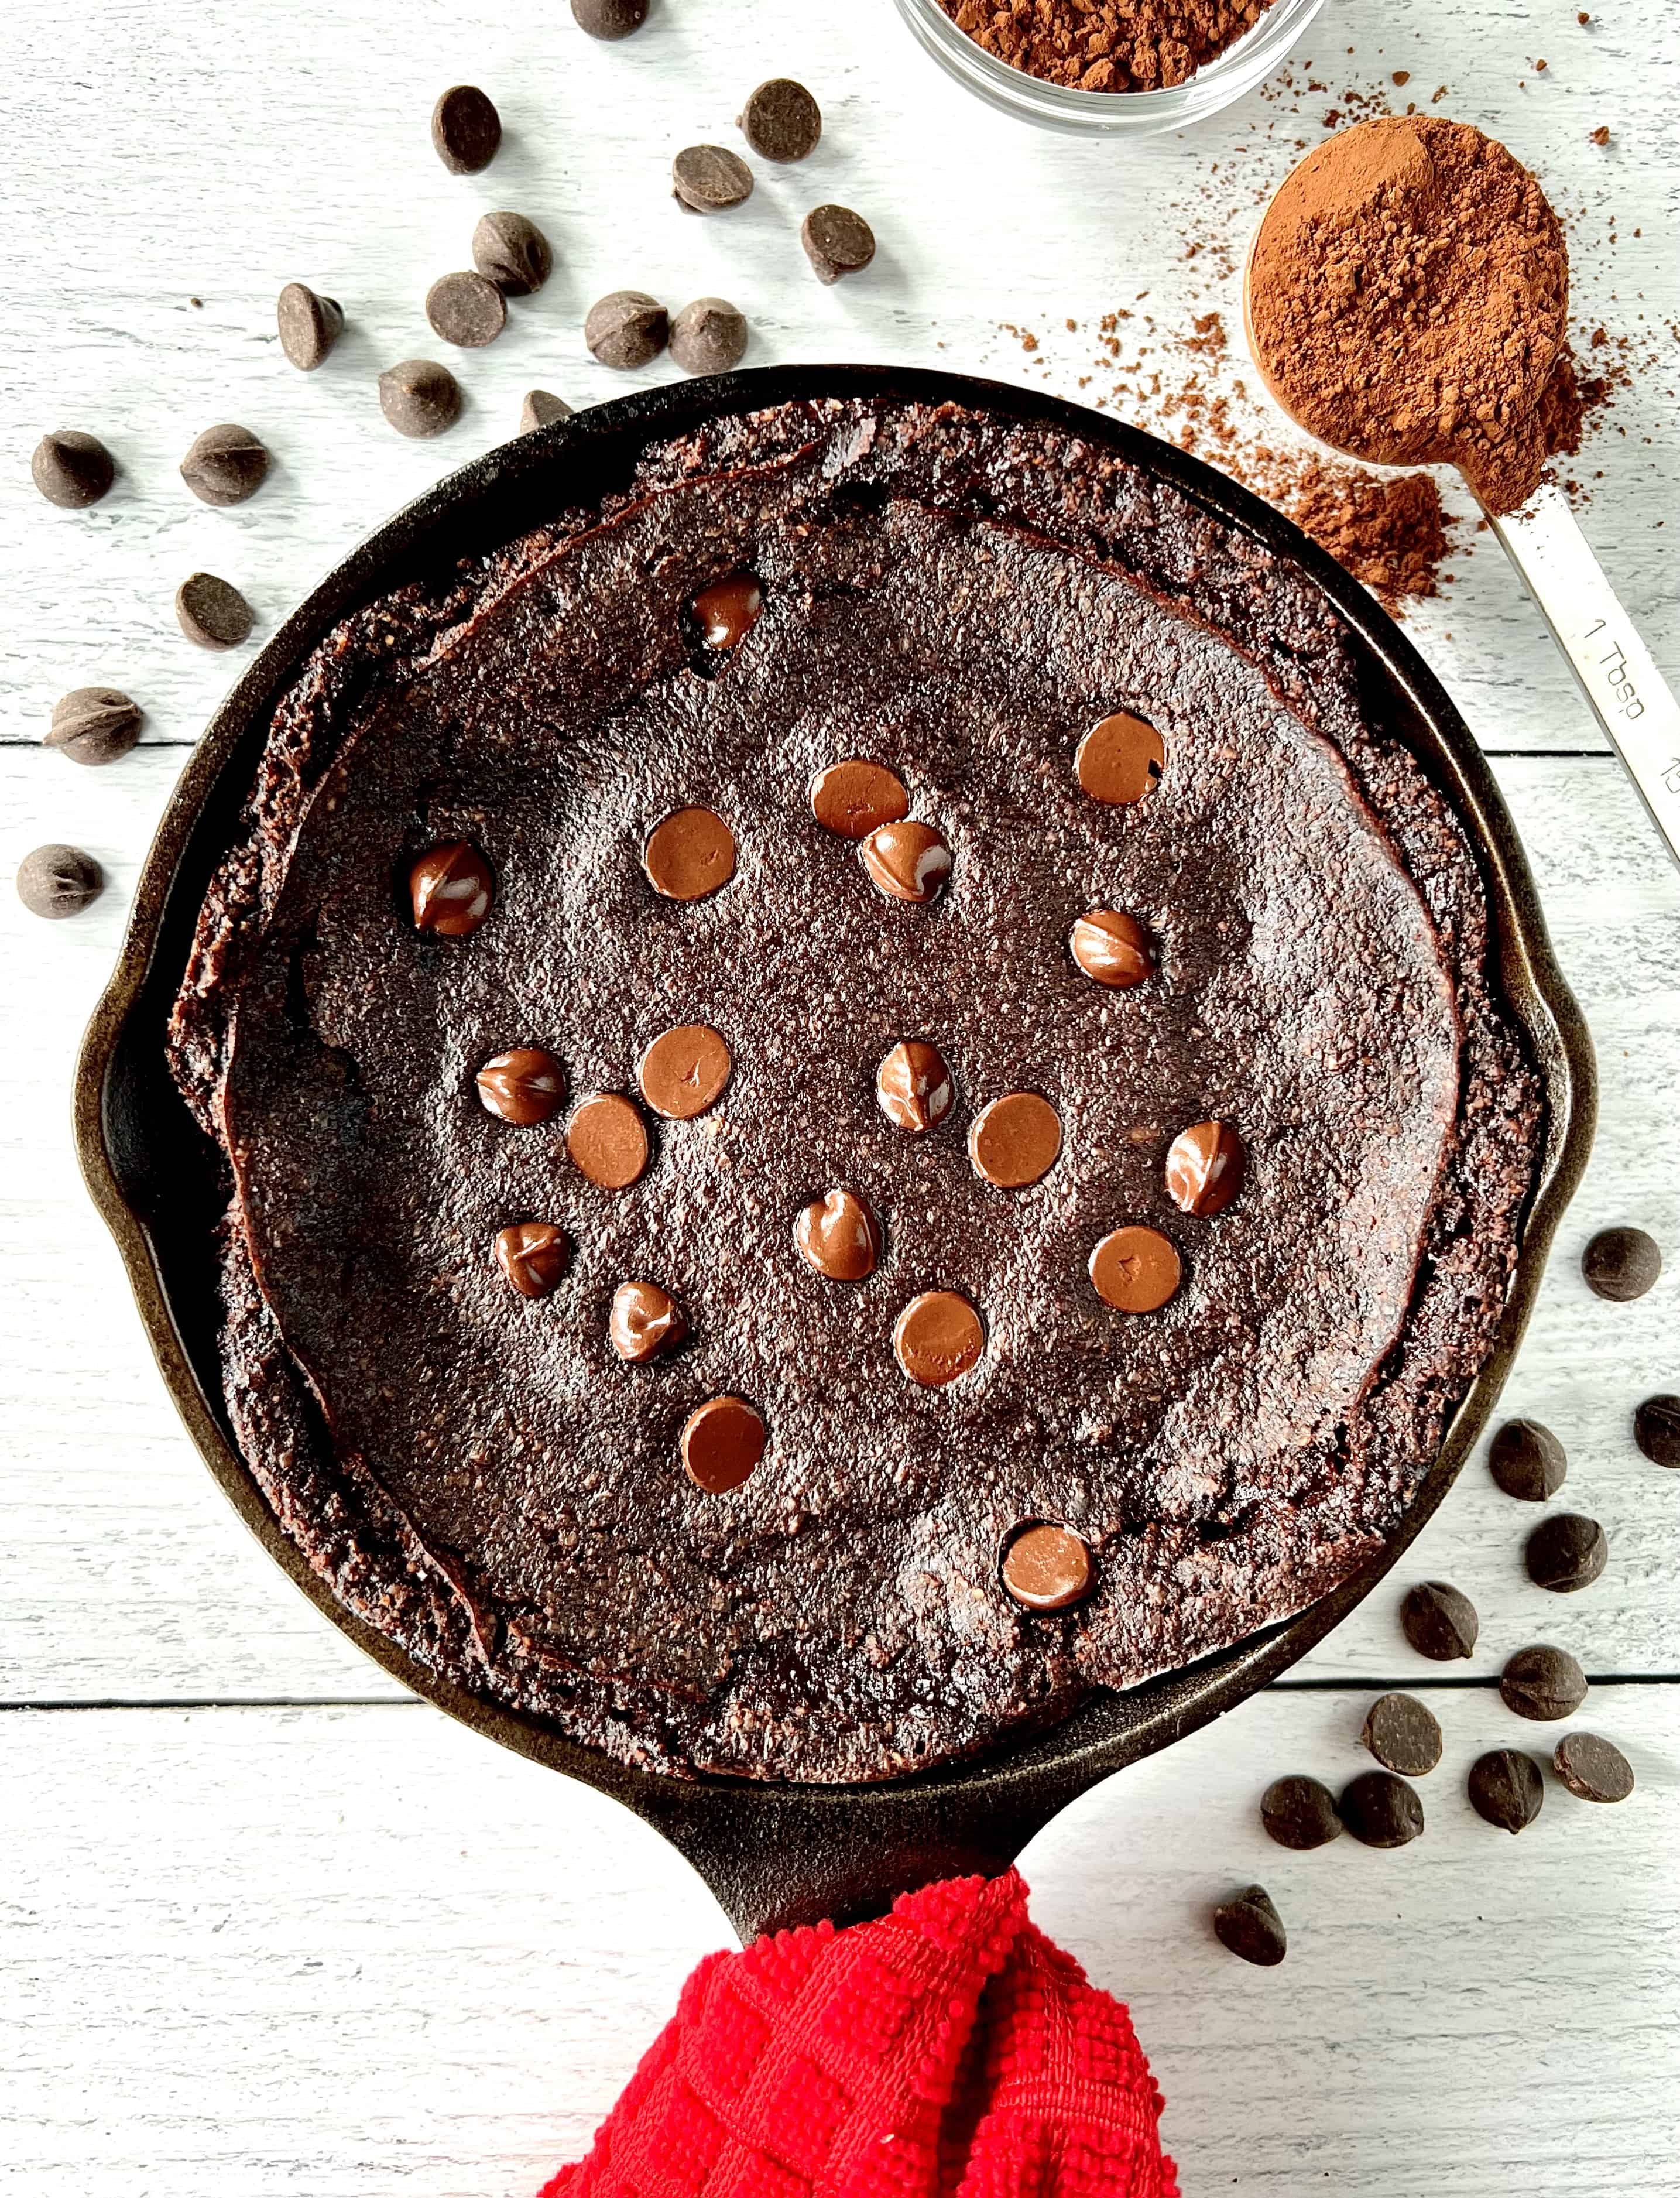 Chocolate vegan skillet cake topped with chocolate chips, in a cast iron skillet with a red towel around its handle, next to more chocolate chips and a bowl and spoon full of cocoa powder.